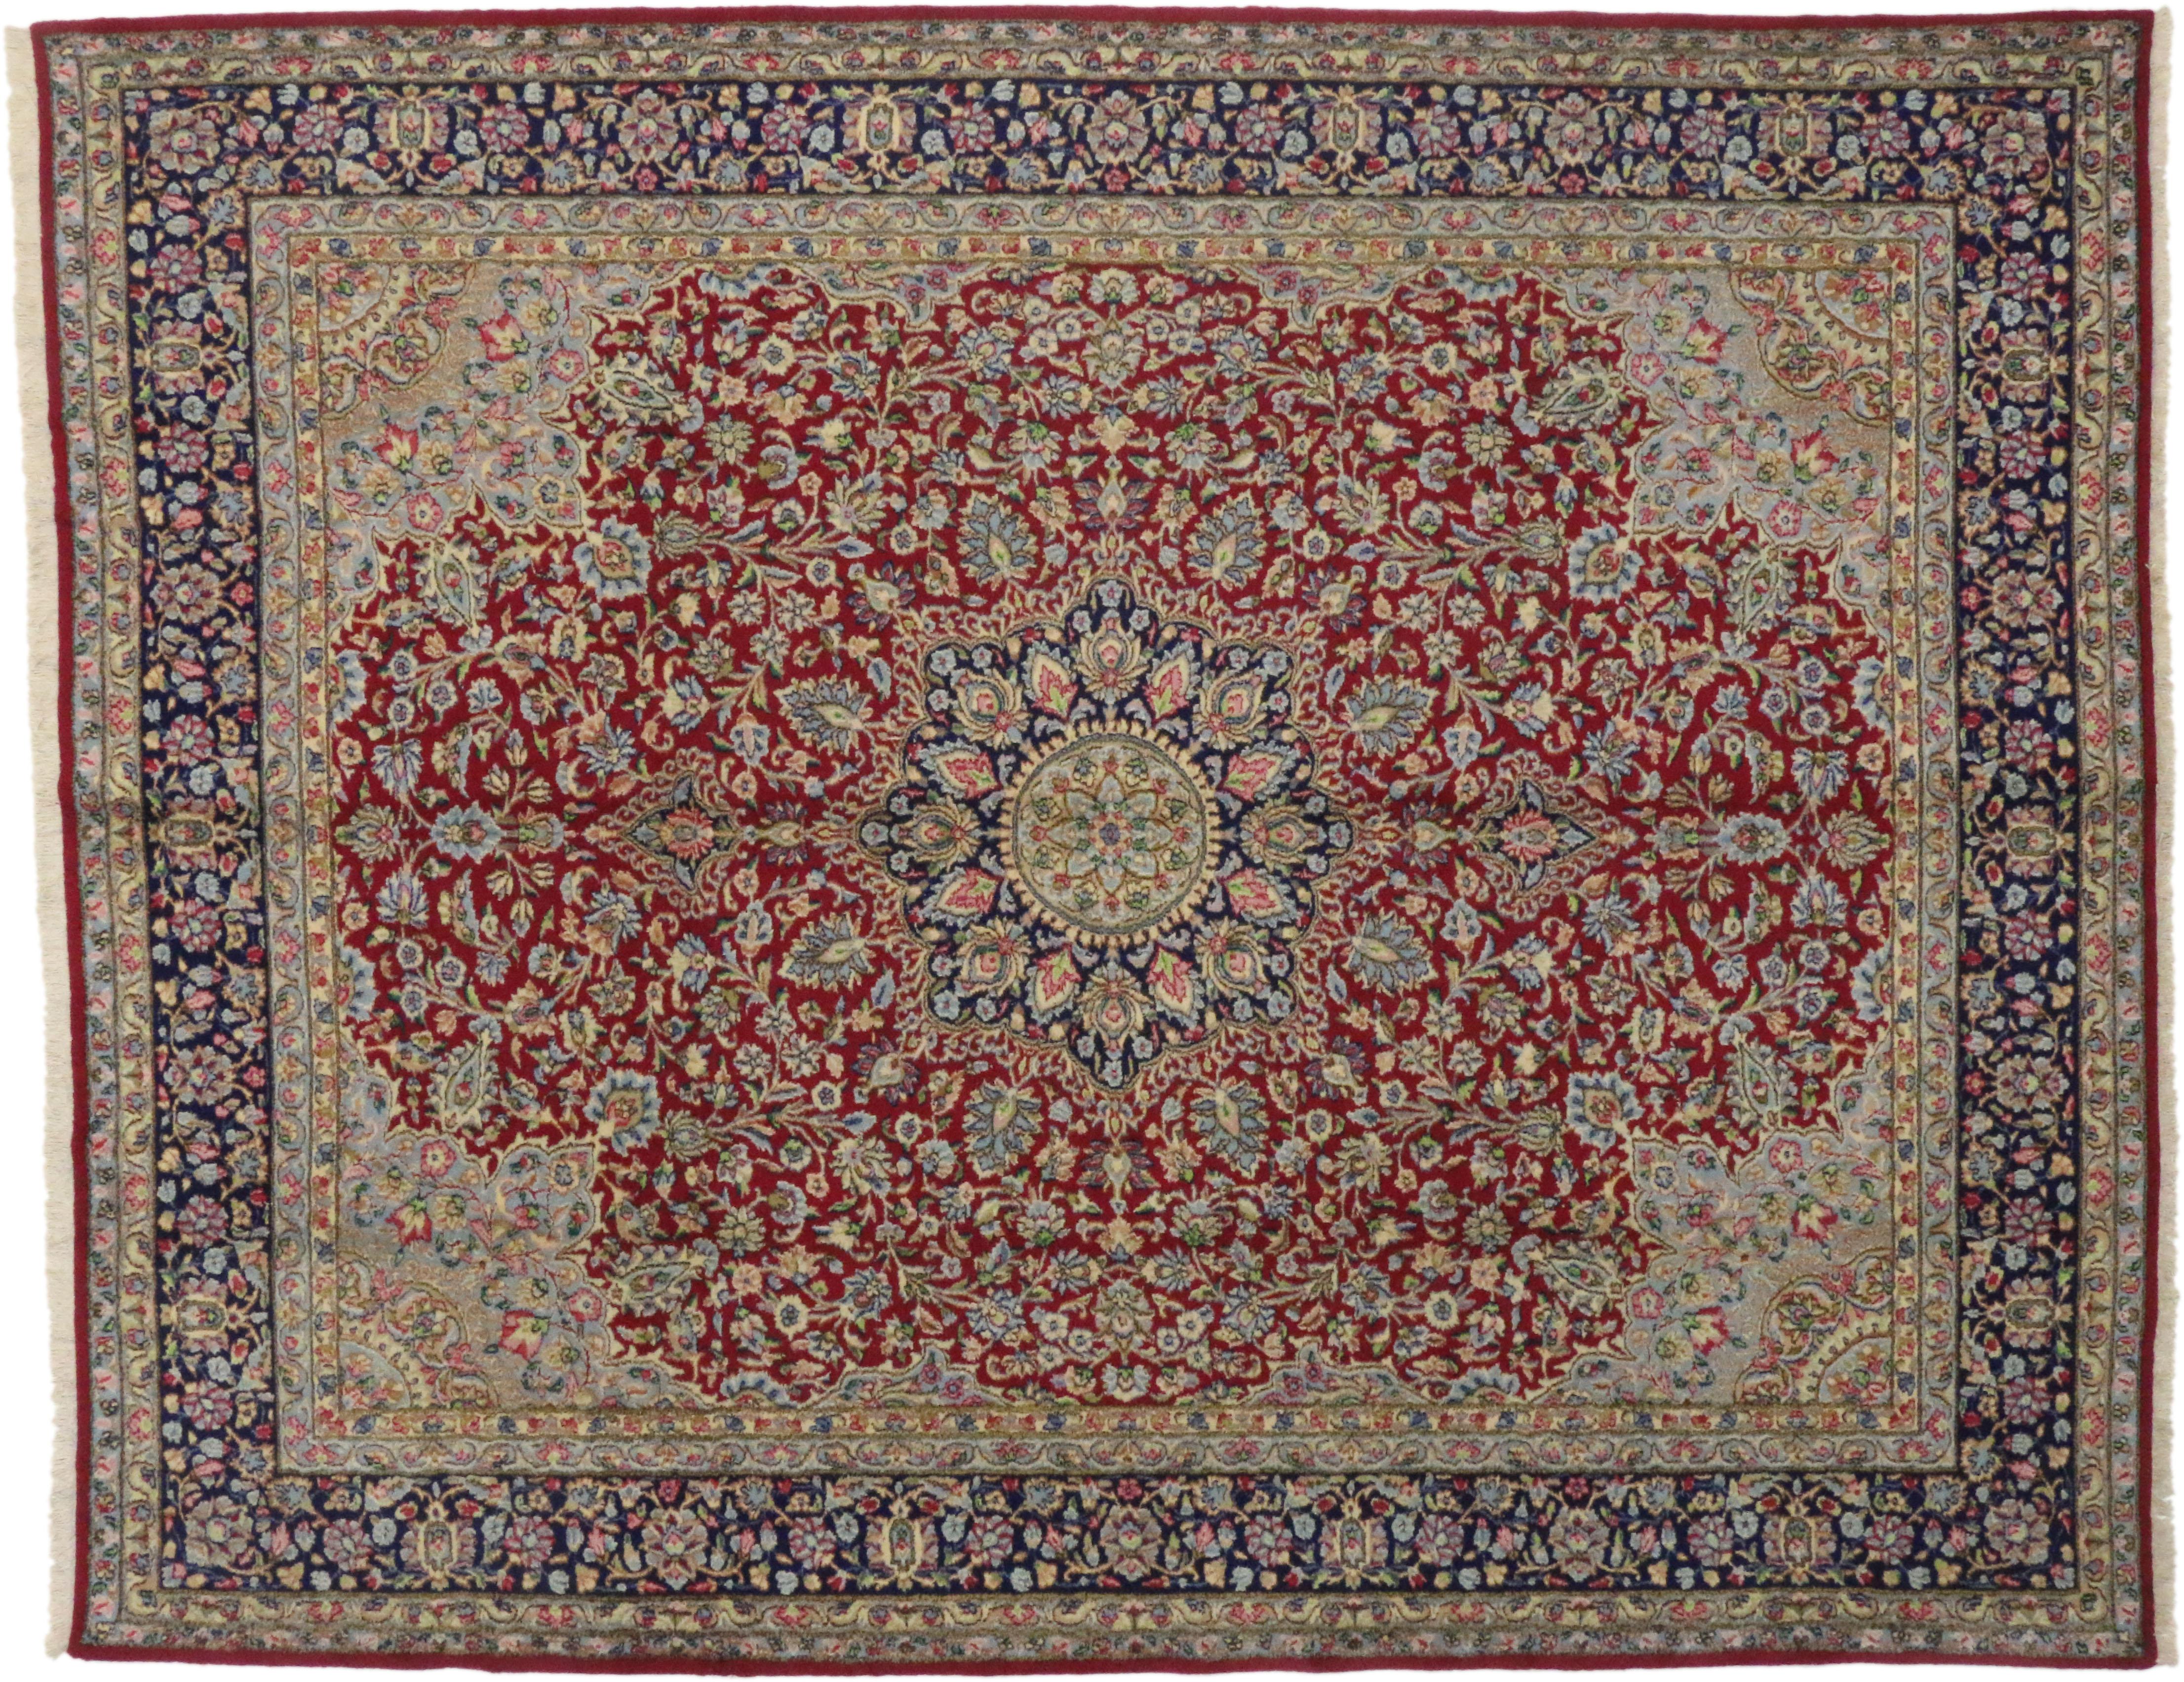 76442 Vintage Persian Kerman Rug with Old World French Victorian Style, Kirman Rug. This hand-knotted wool vintage Persian Kerman rug features a cusped palmette roundel medallion surrounded by an all-over floral pattern rhythmically dancing on a